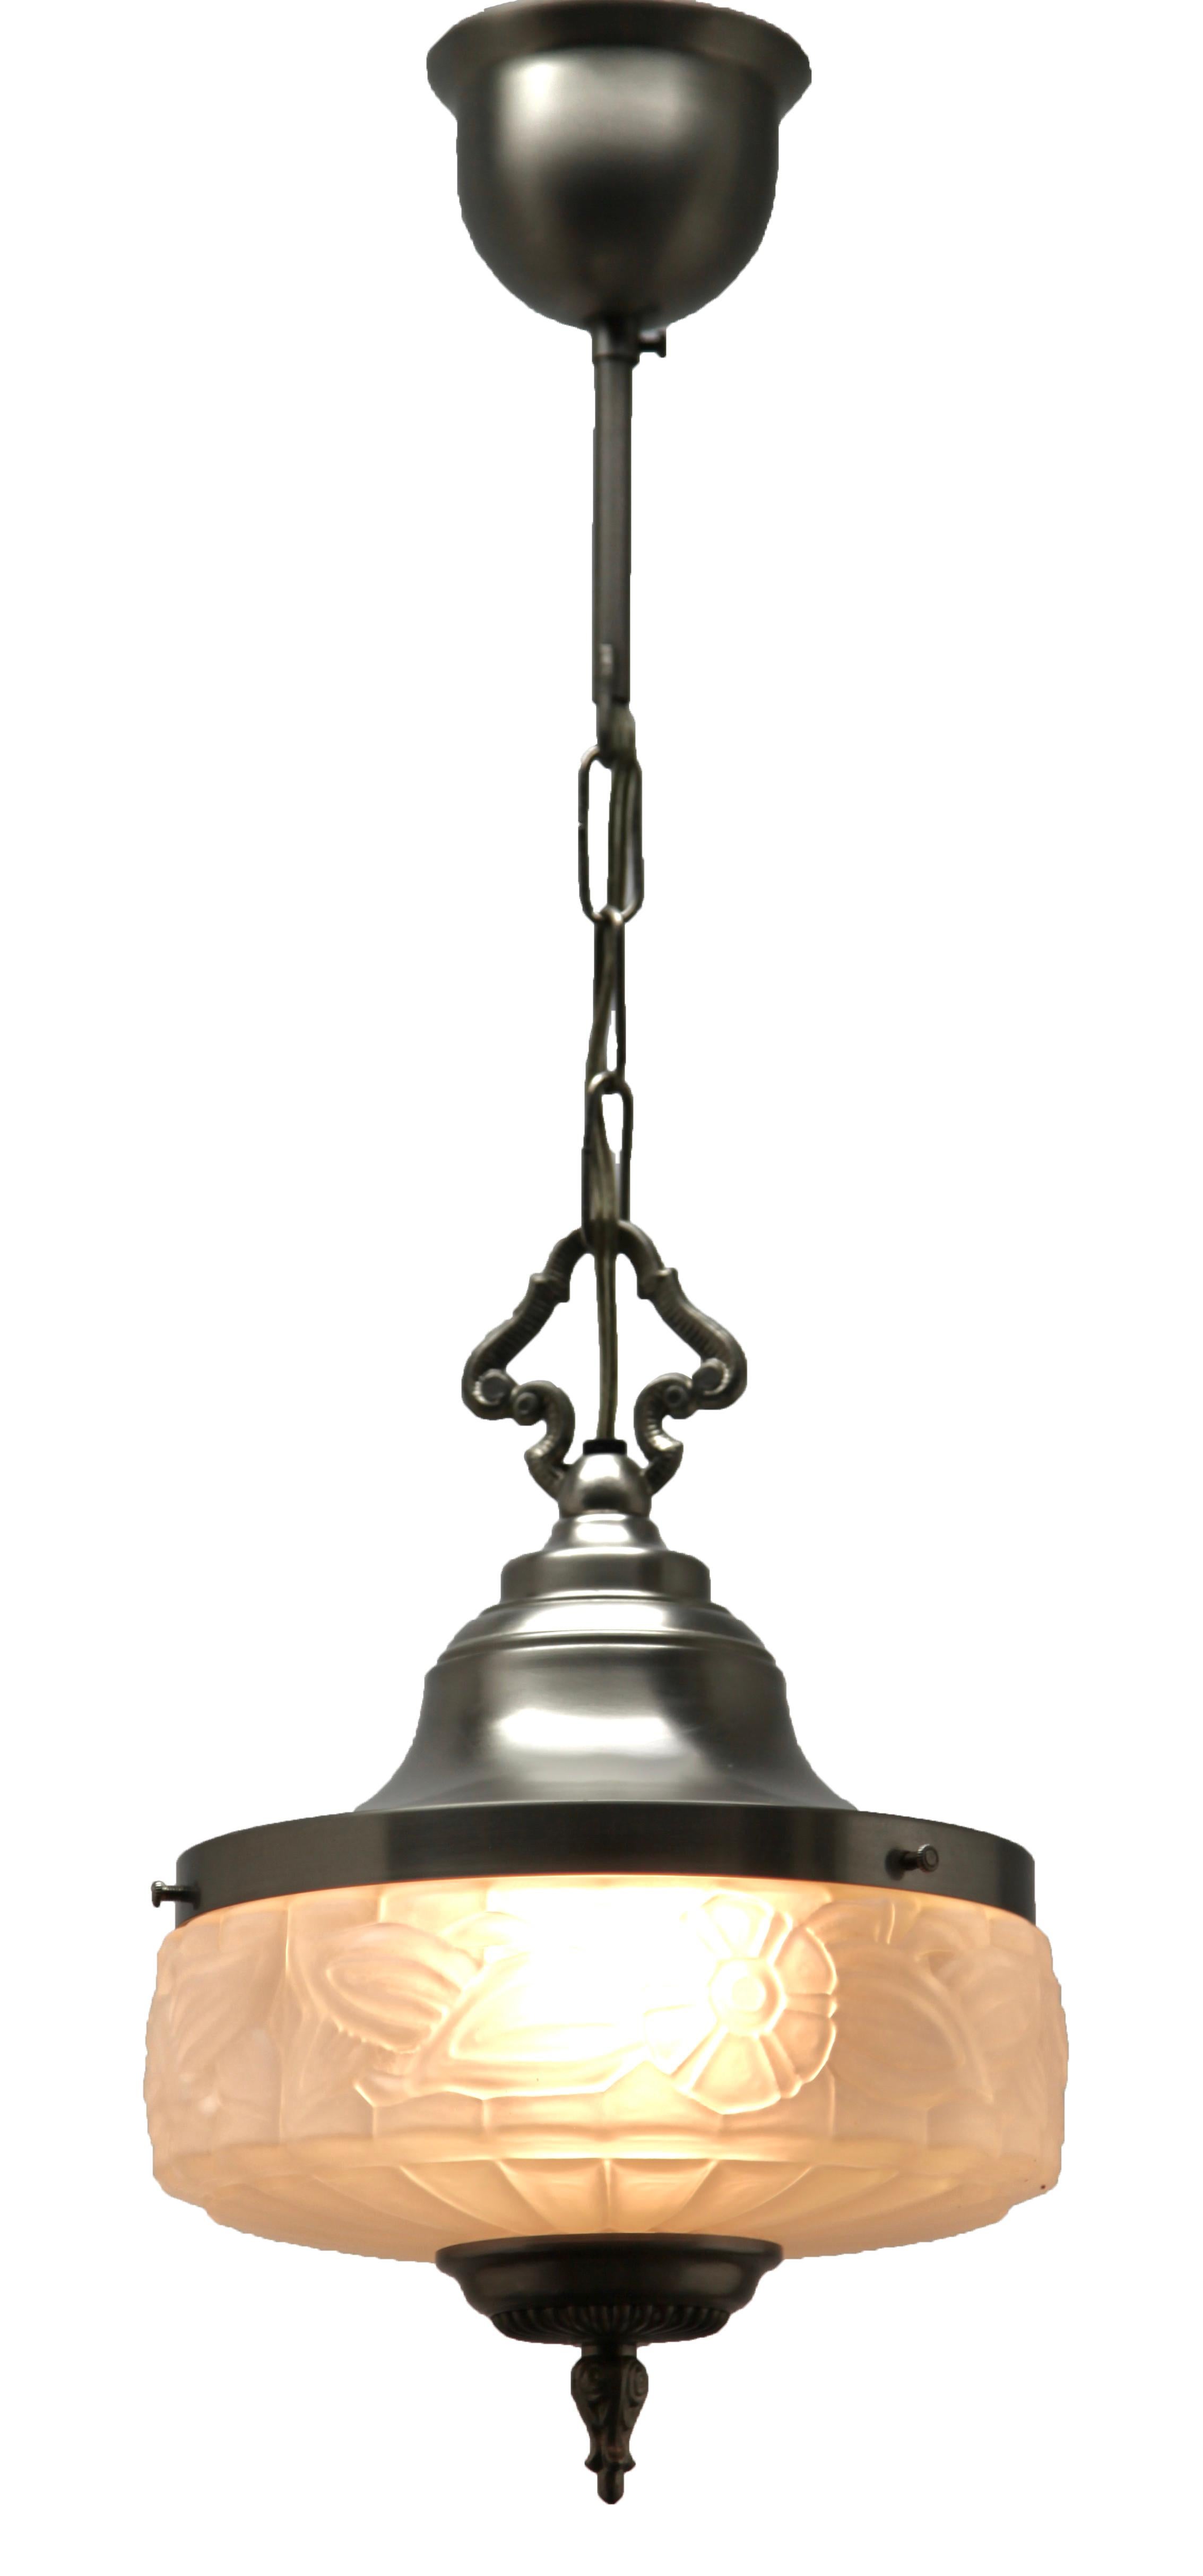 Style Art Deco ceiling lamps
Photography fails to capture the simple elegant illumination provided by this lamp.

Fitting messing pendant ceiling light with screw fixing to hold a stylish Belgian Art Deco lampshade. Good distribution of darker